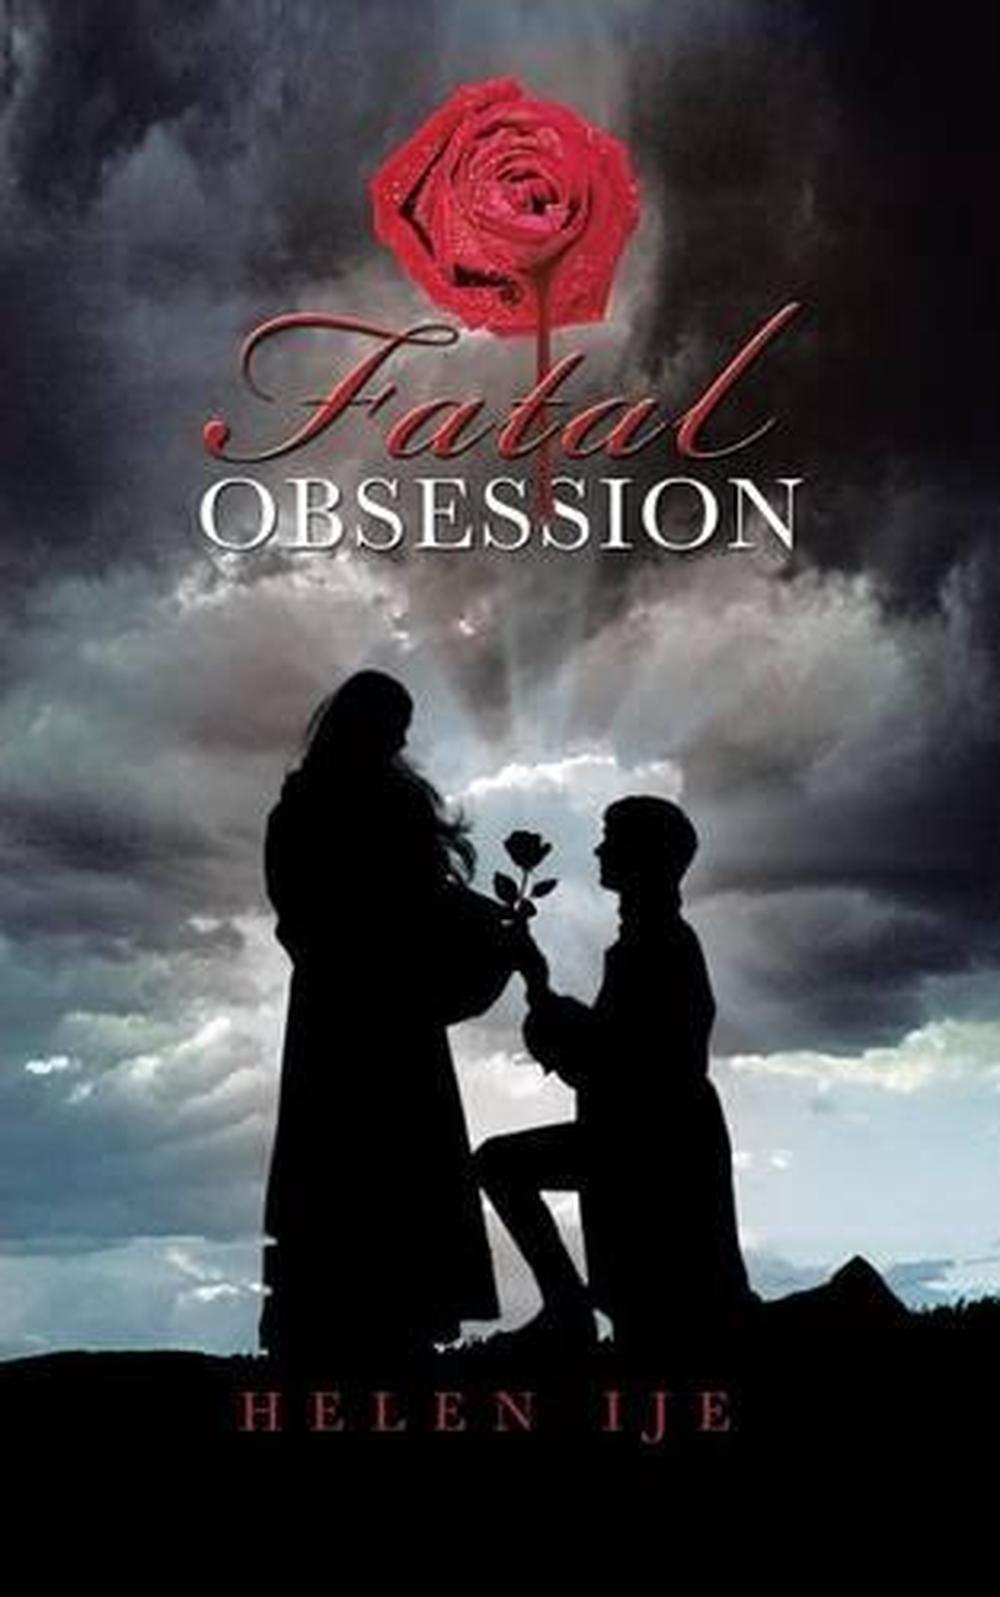 61 List A Fatal Obsession Book for Kids